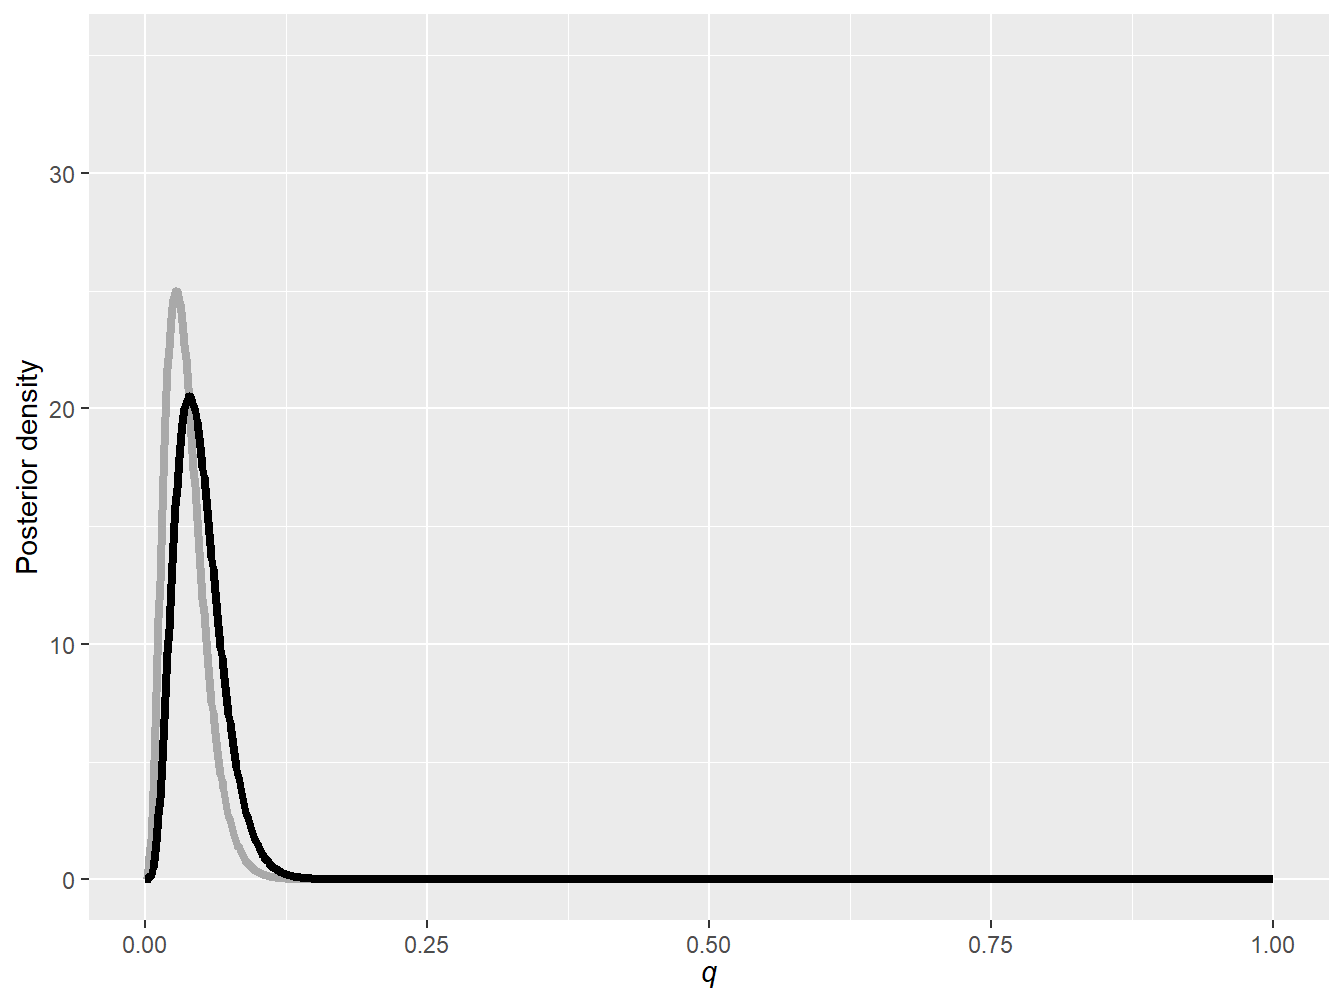 Posterior densities based on two different priors: \(a=1\) and \(b=10\) (gray), and \(a=2\) and \(b=2\) (black)